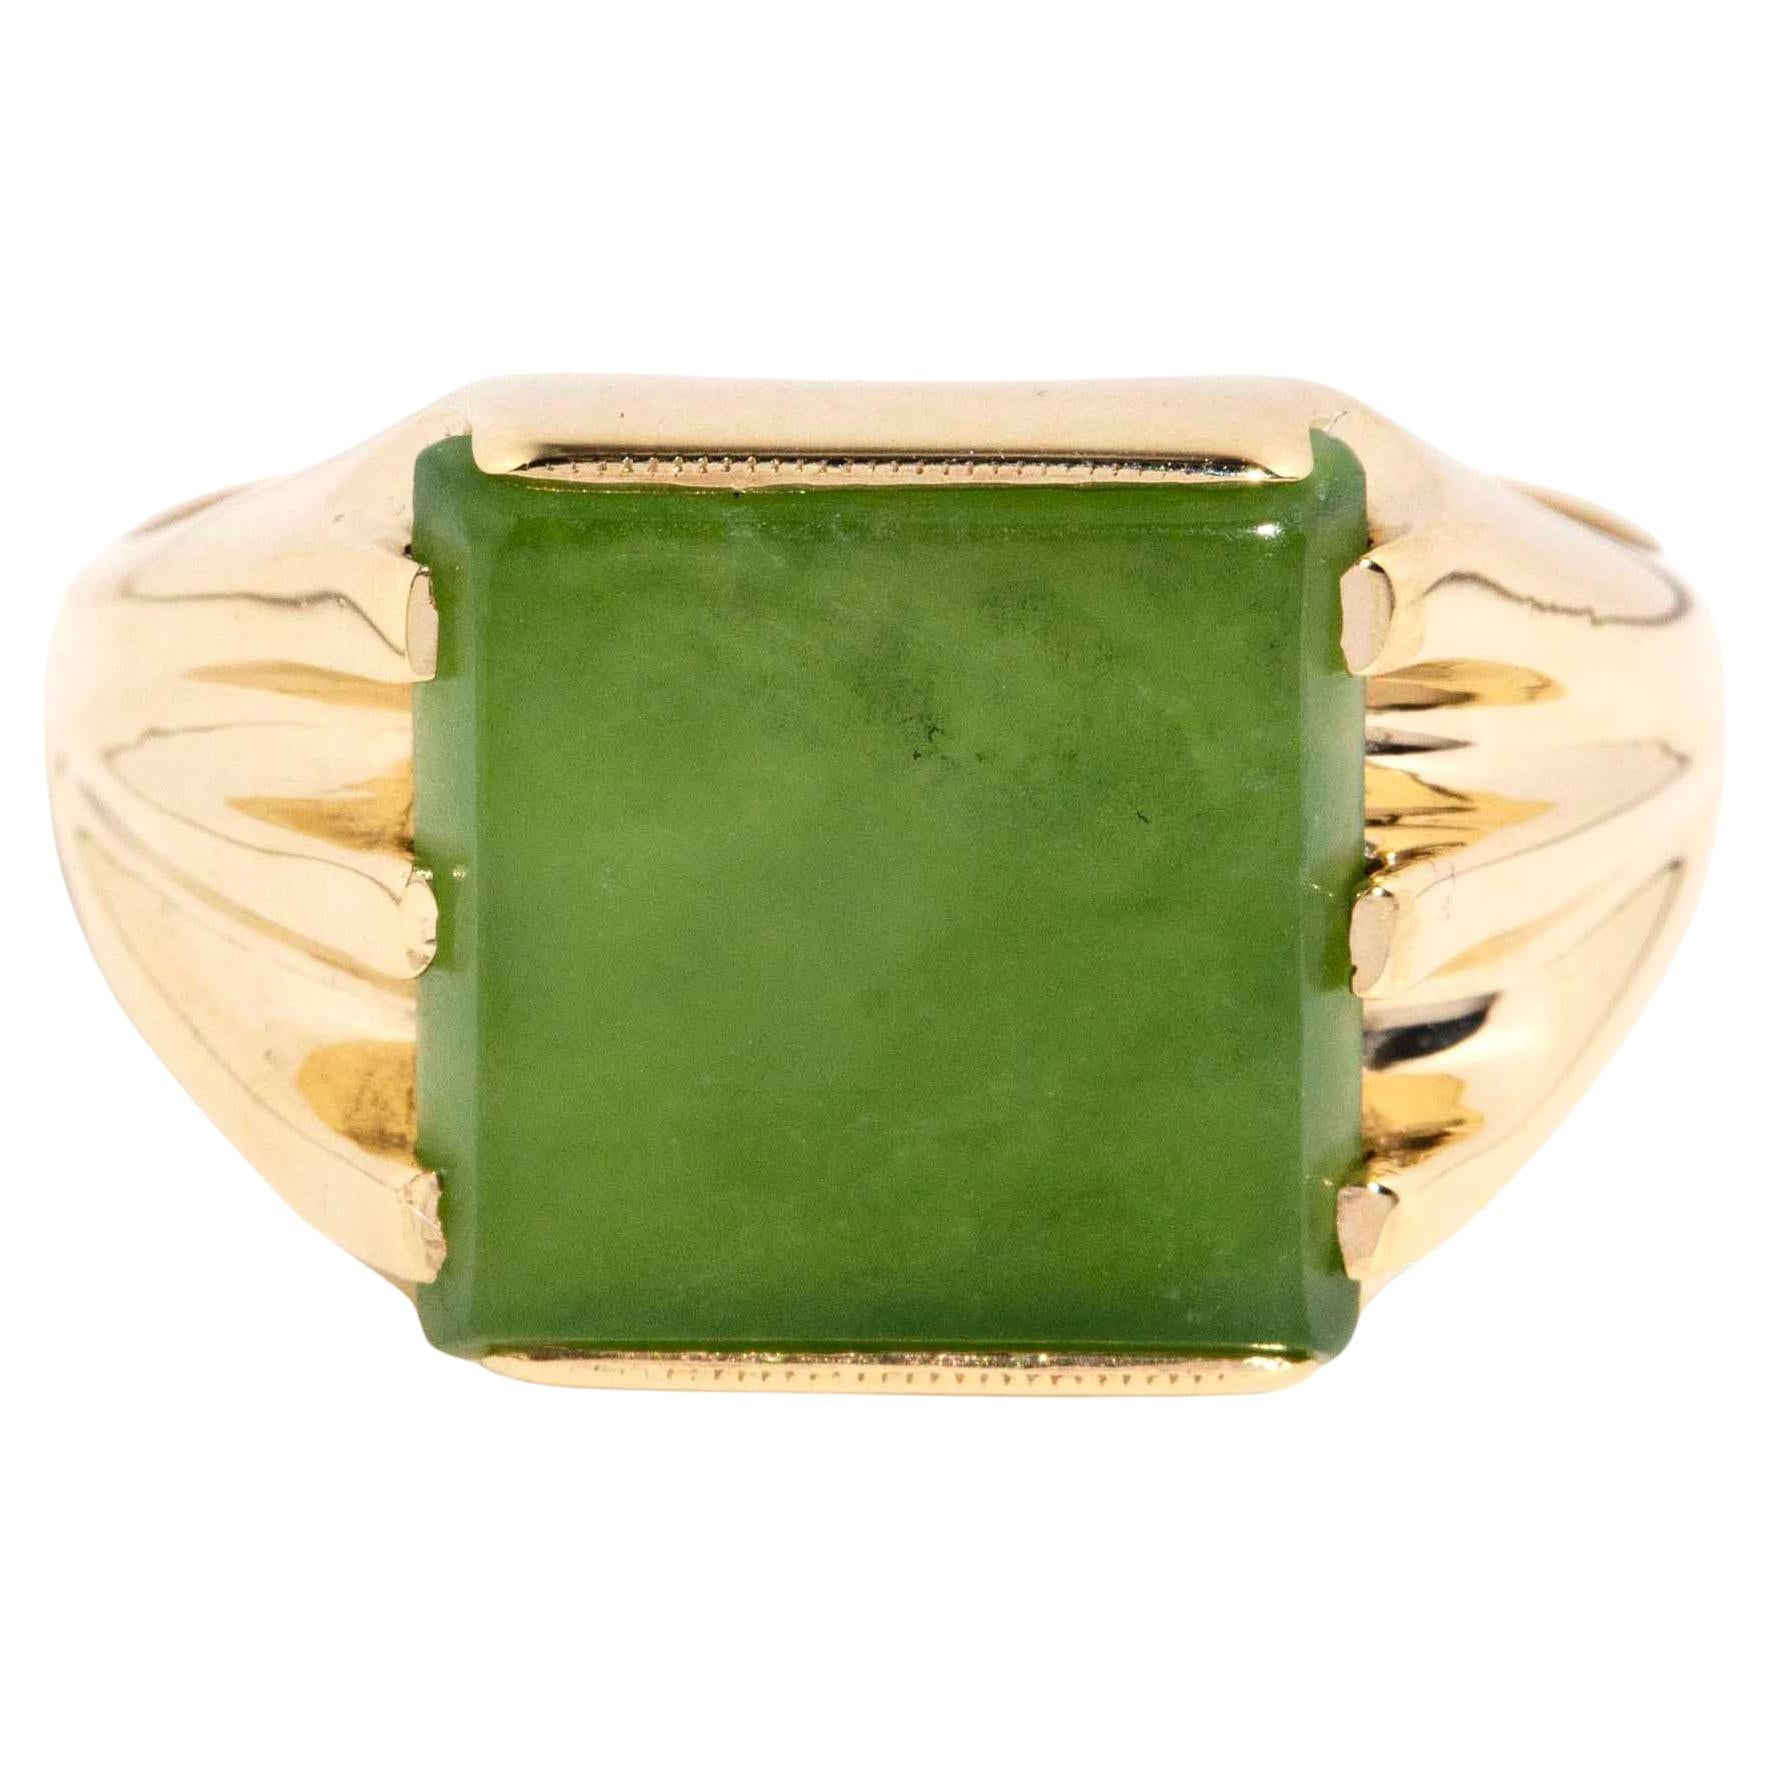 Vintage Circa 1970s Square Nephrite Jade 9 Carat Yellow Gold Grooved Ring